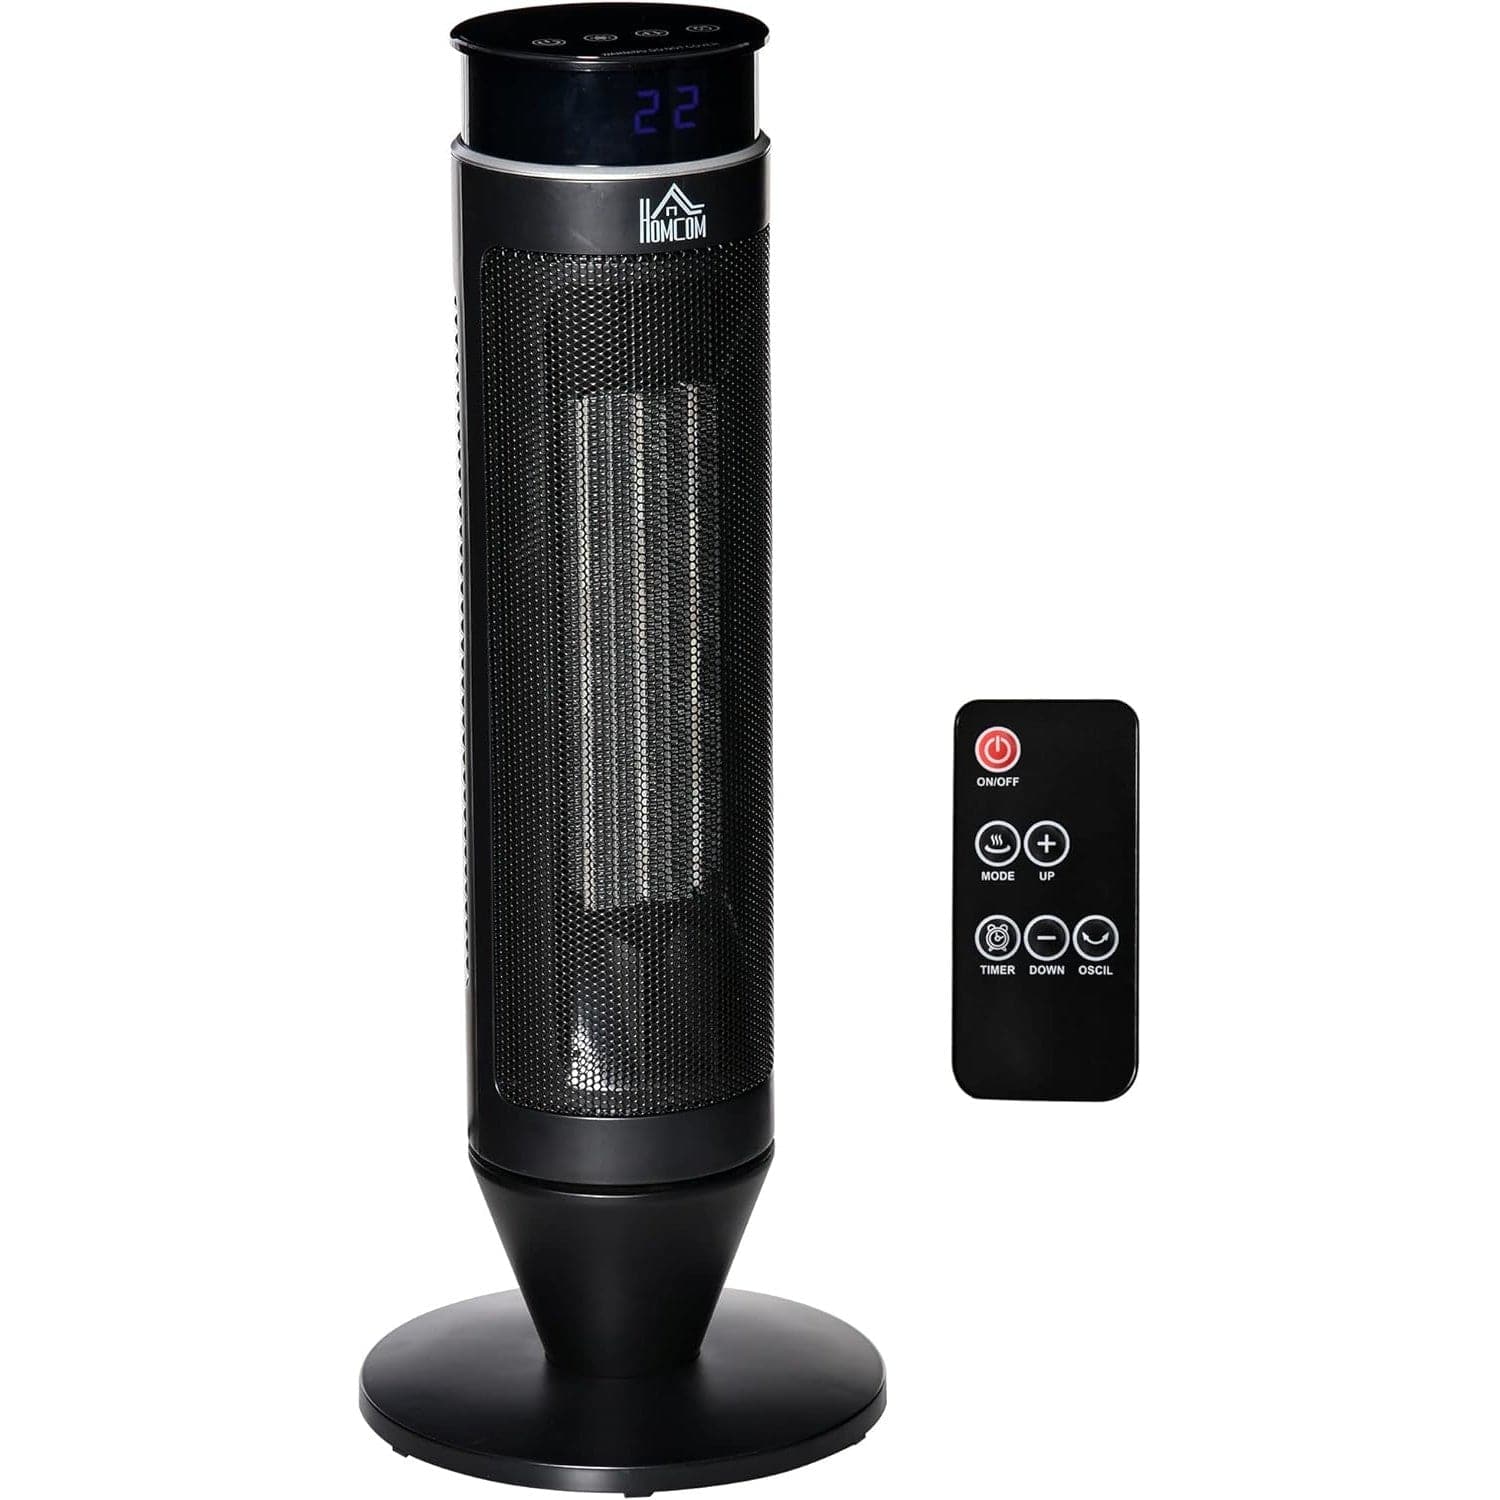 Maplin Plus 42° Oscillation Indoor Ceramic Tower Space Heater with Remote Control & Timer - Black